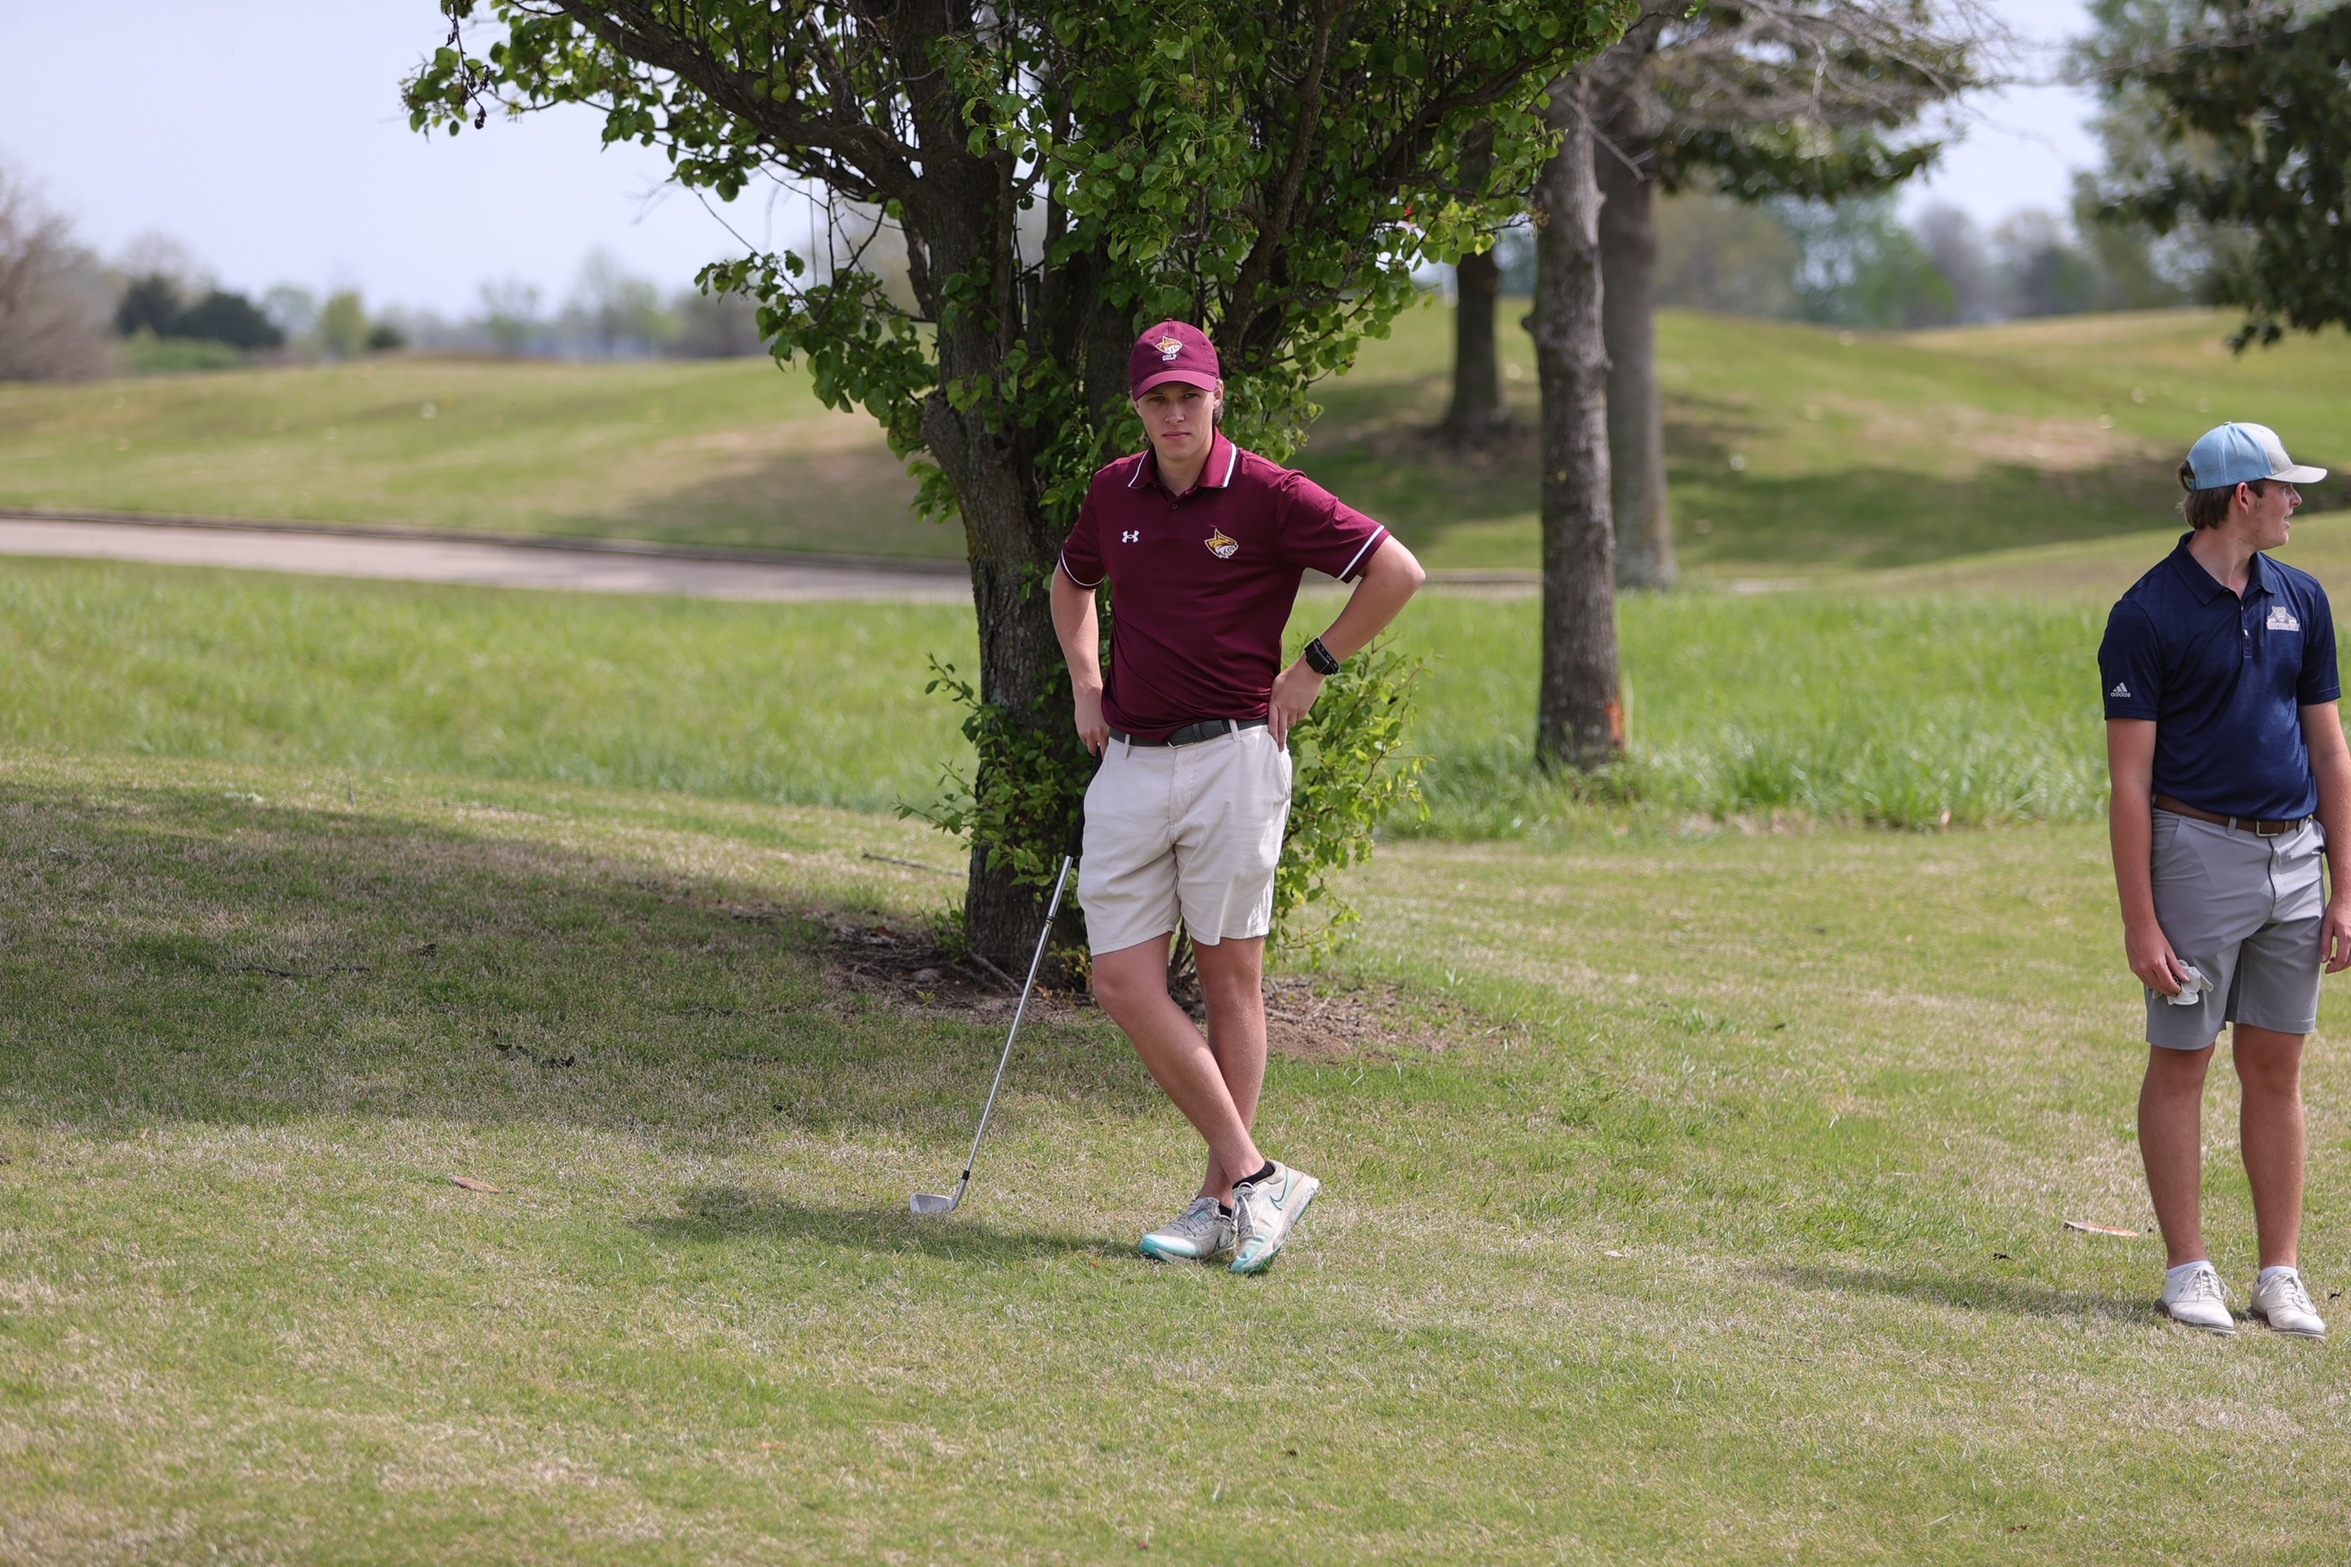 Pearl River golf's season come to an end